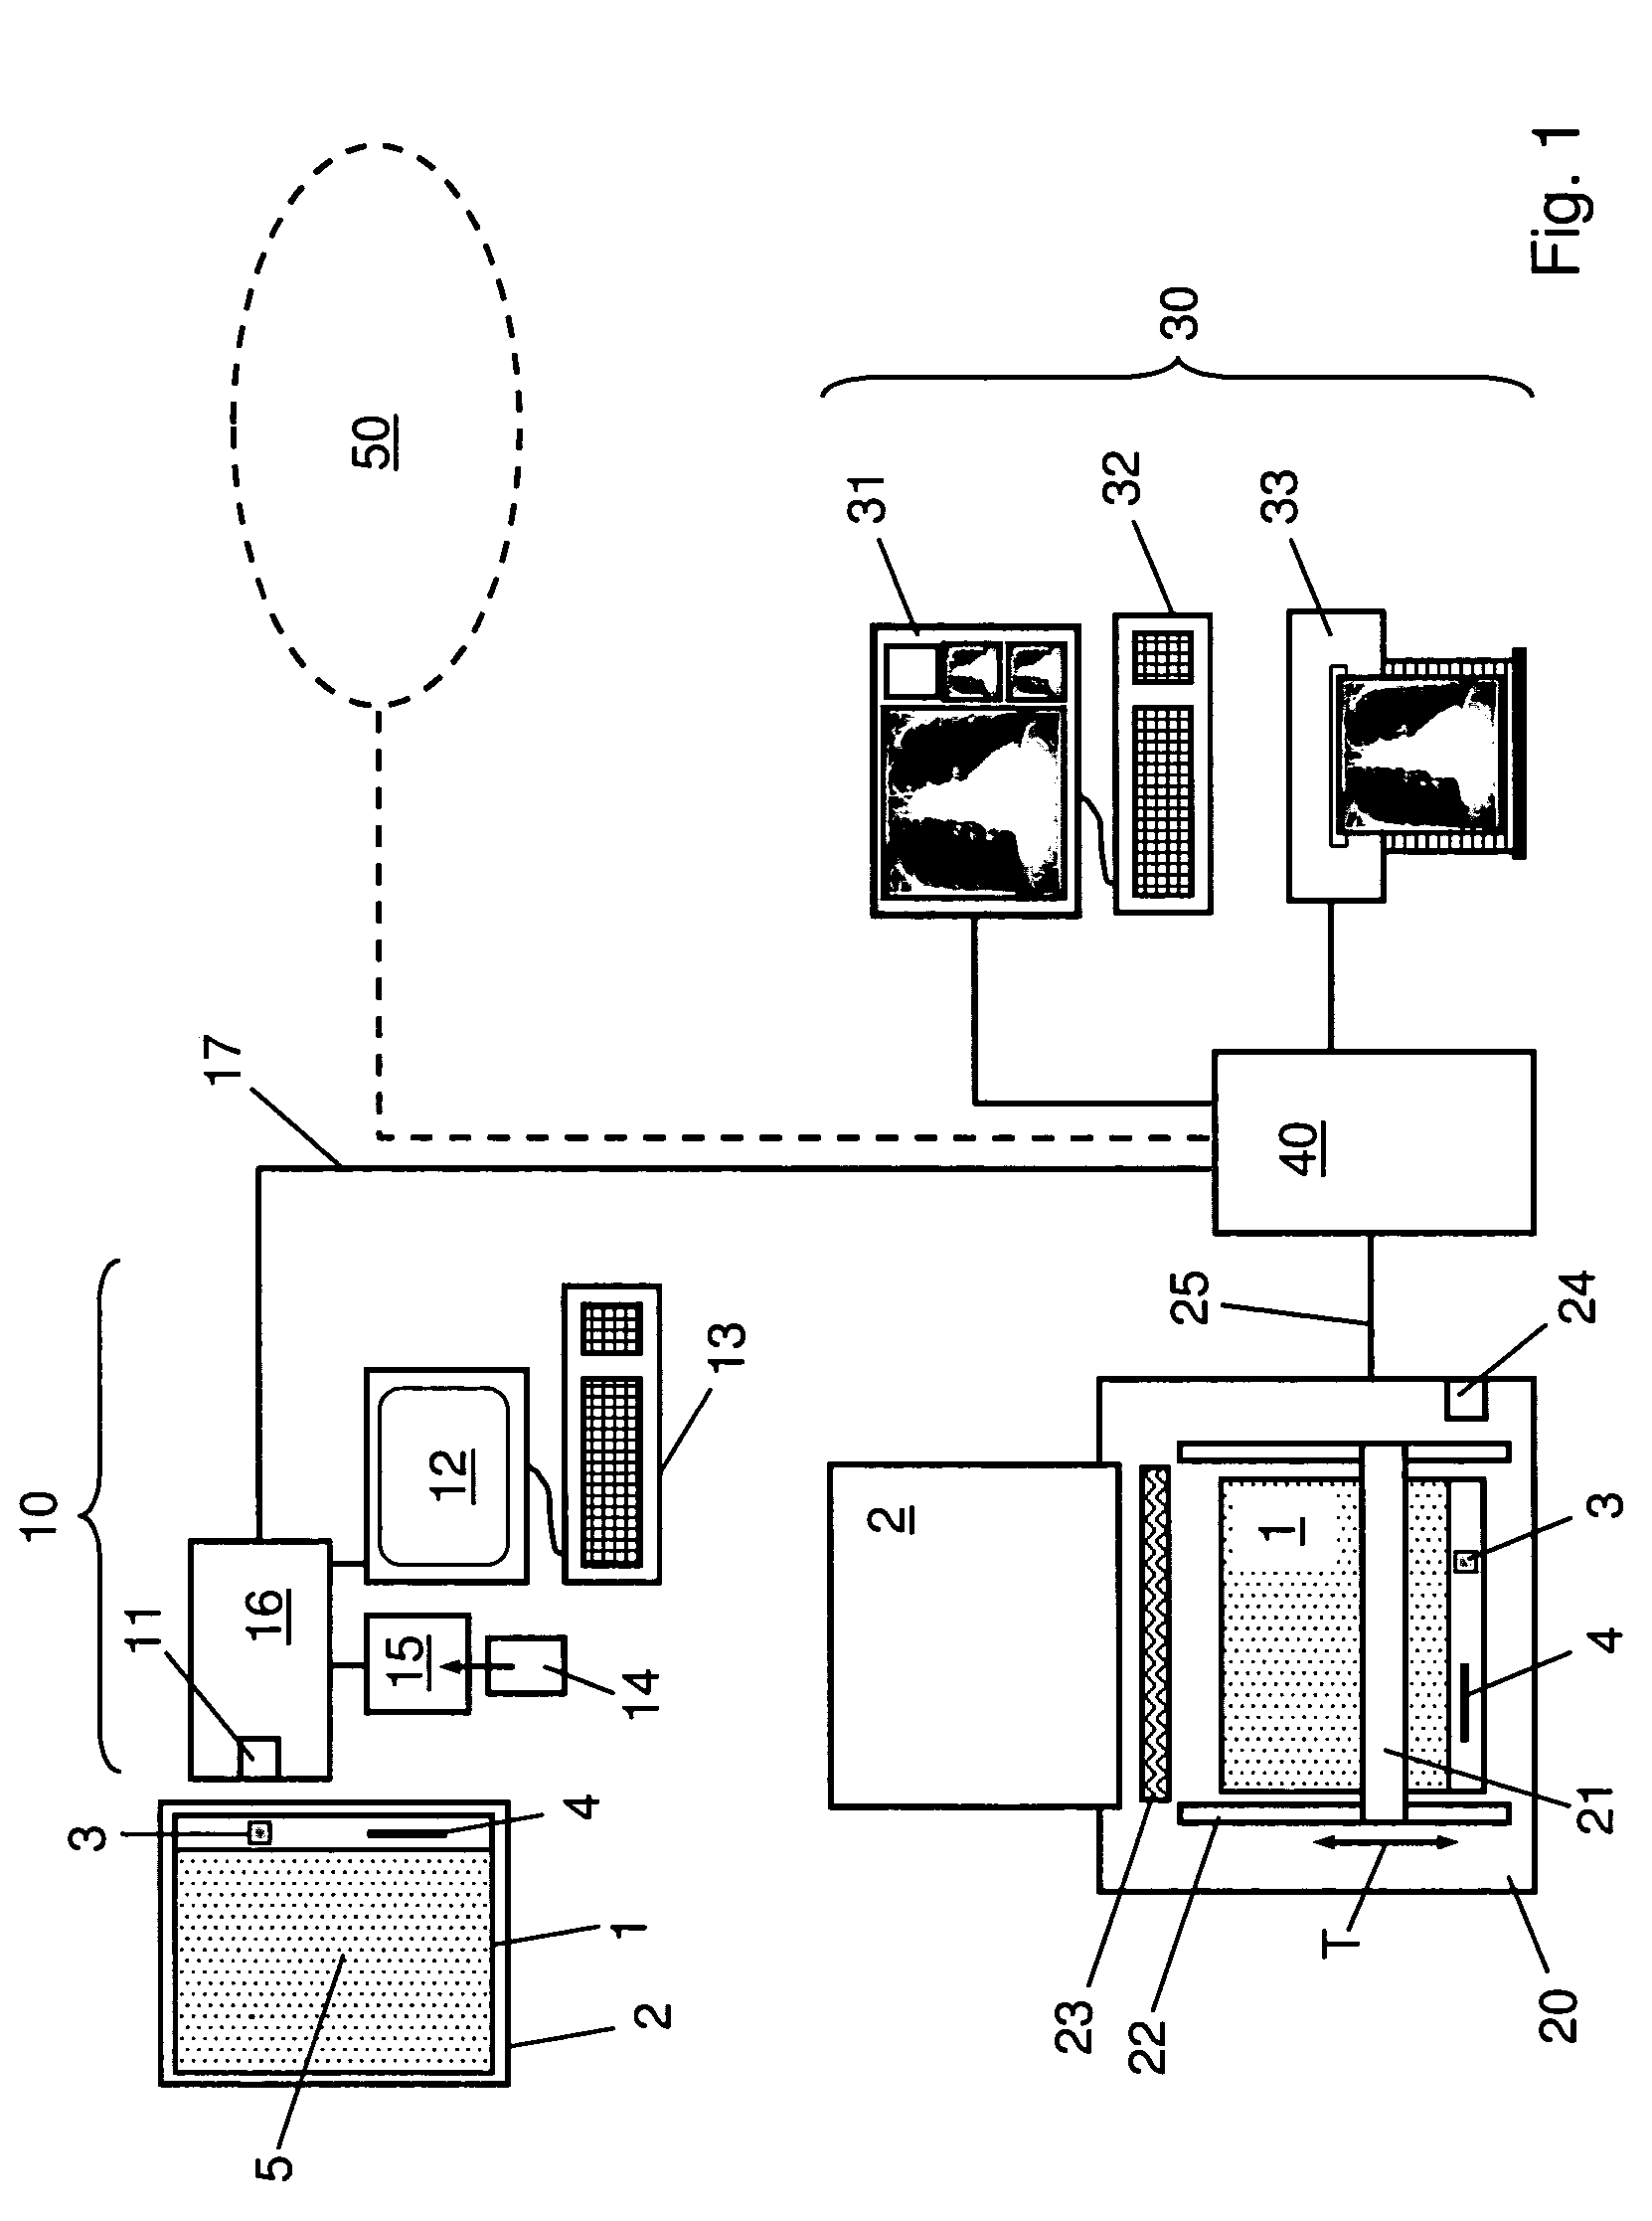 Image carrier for storing X-ray information, and a system and method for processing an image carrier